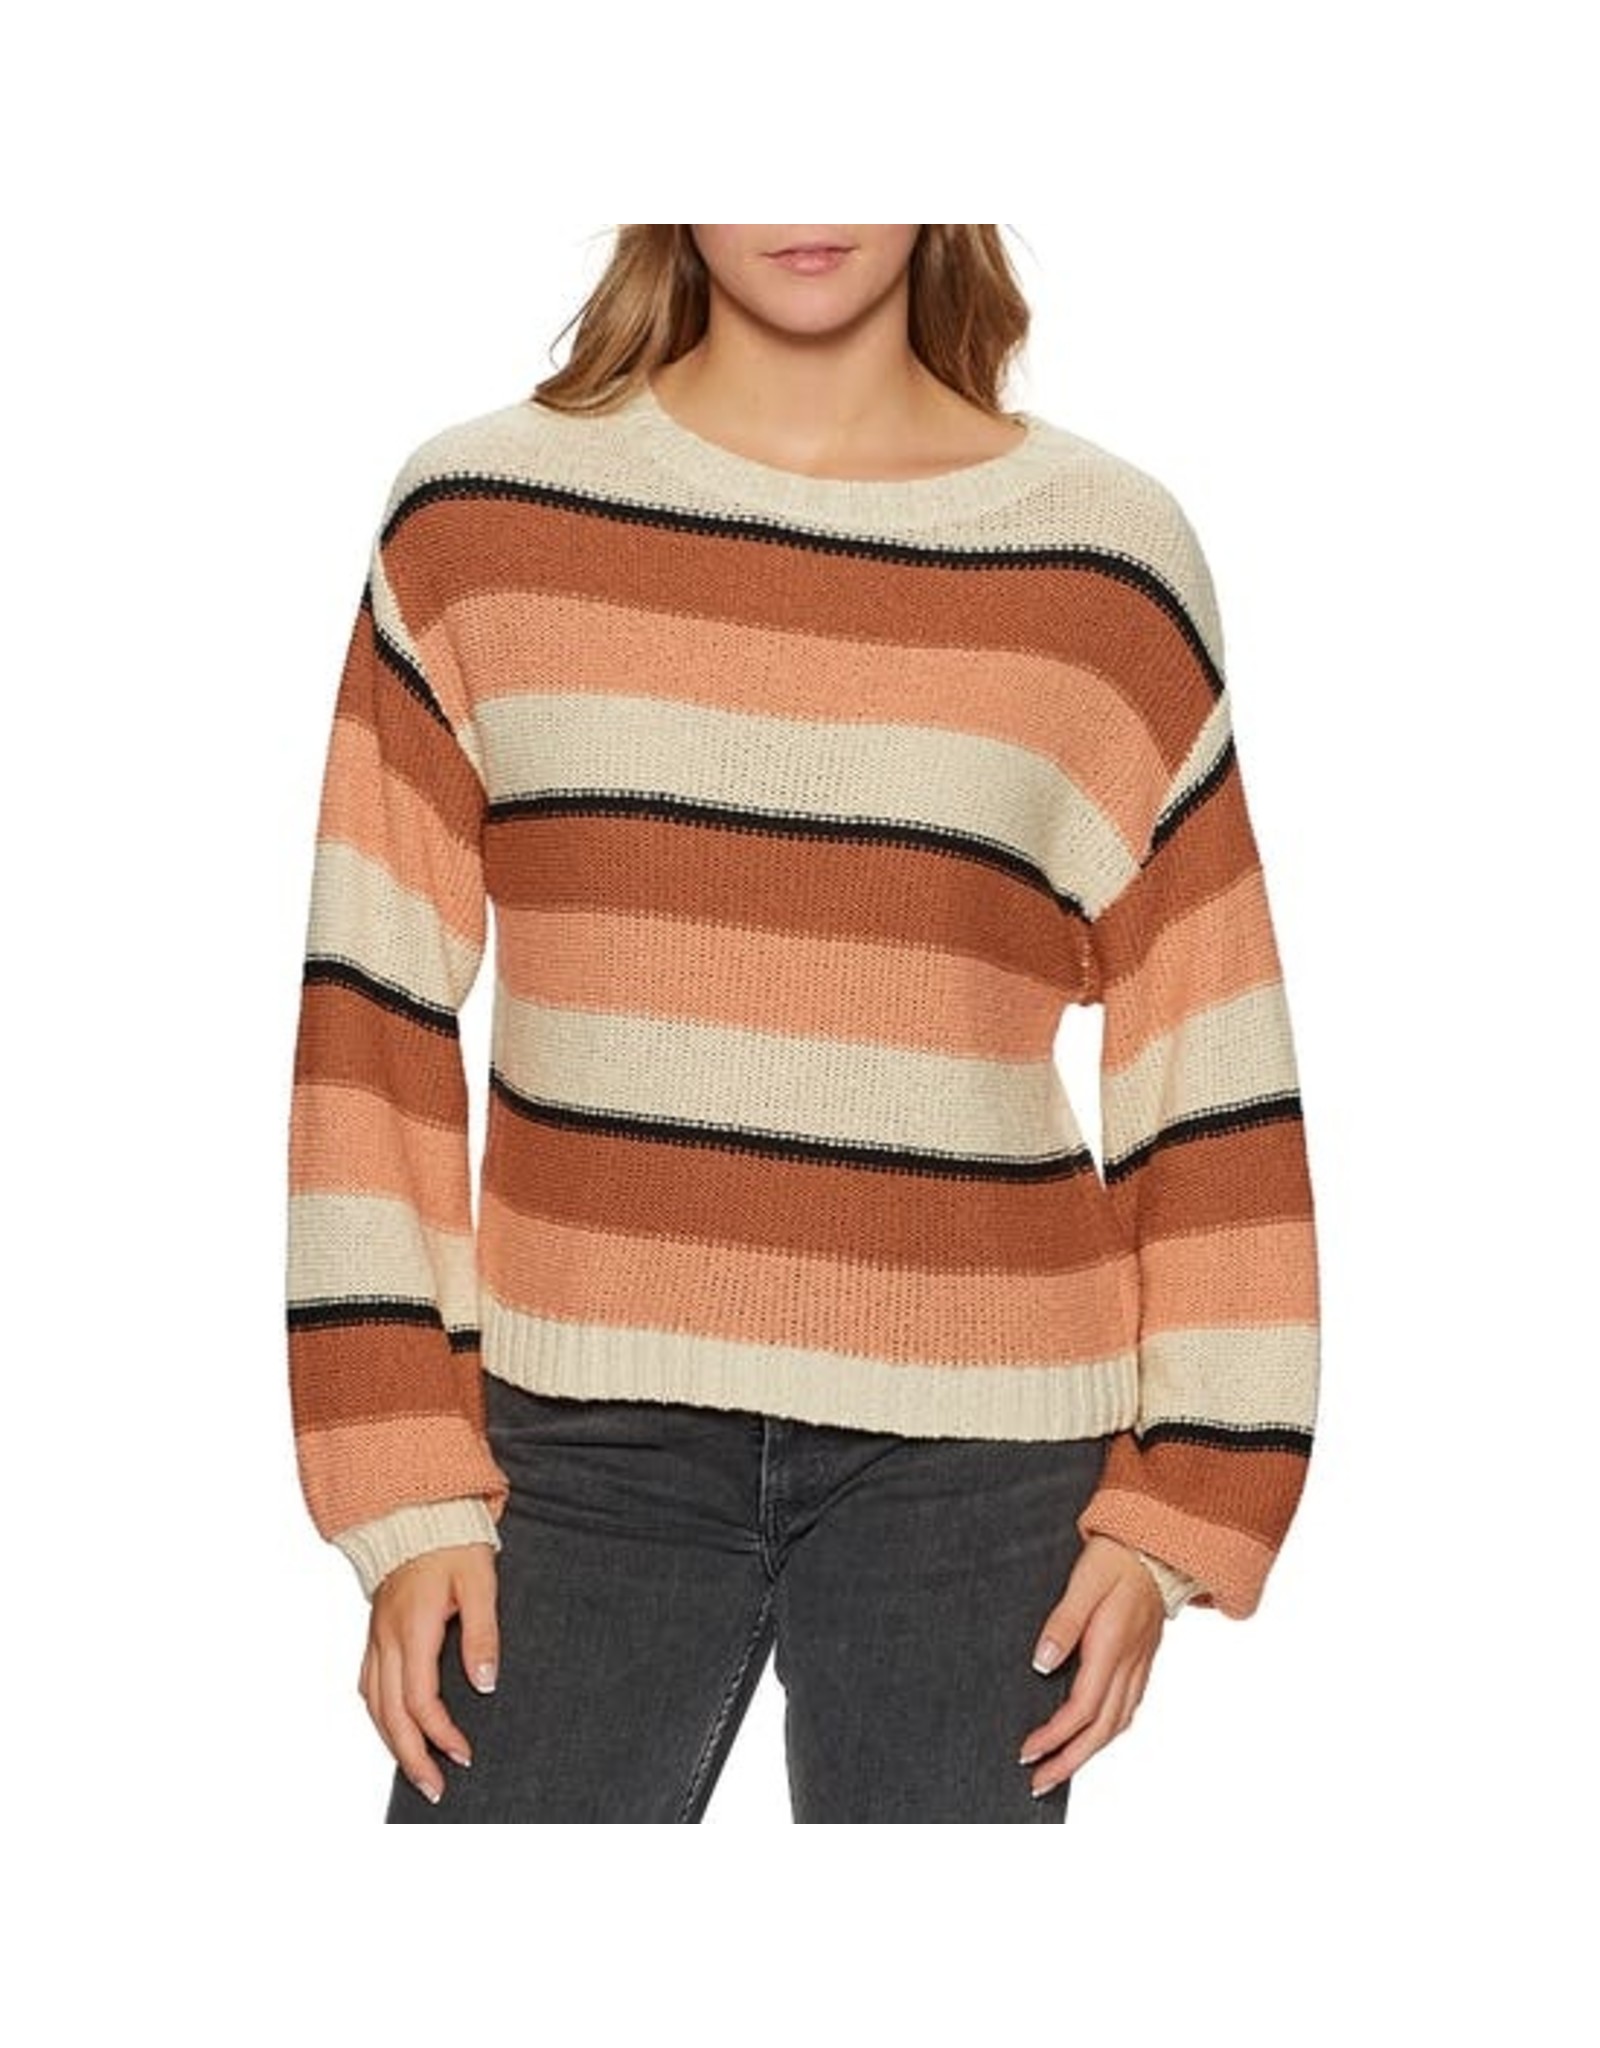 BILLABONG Seeing Double Sweater